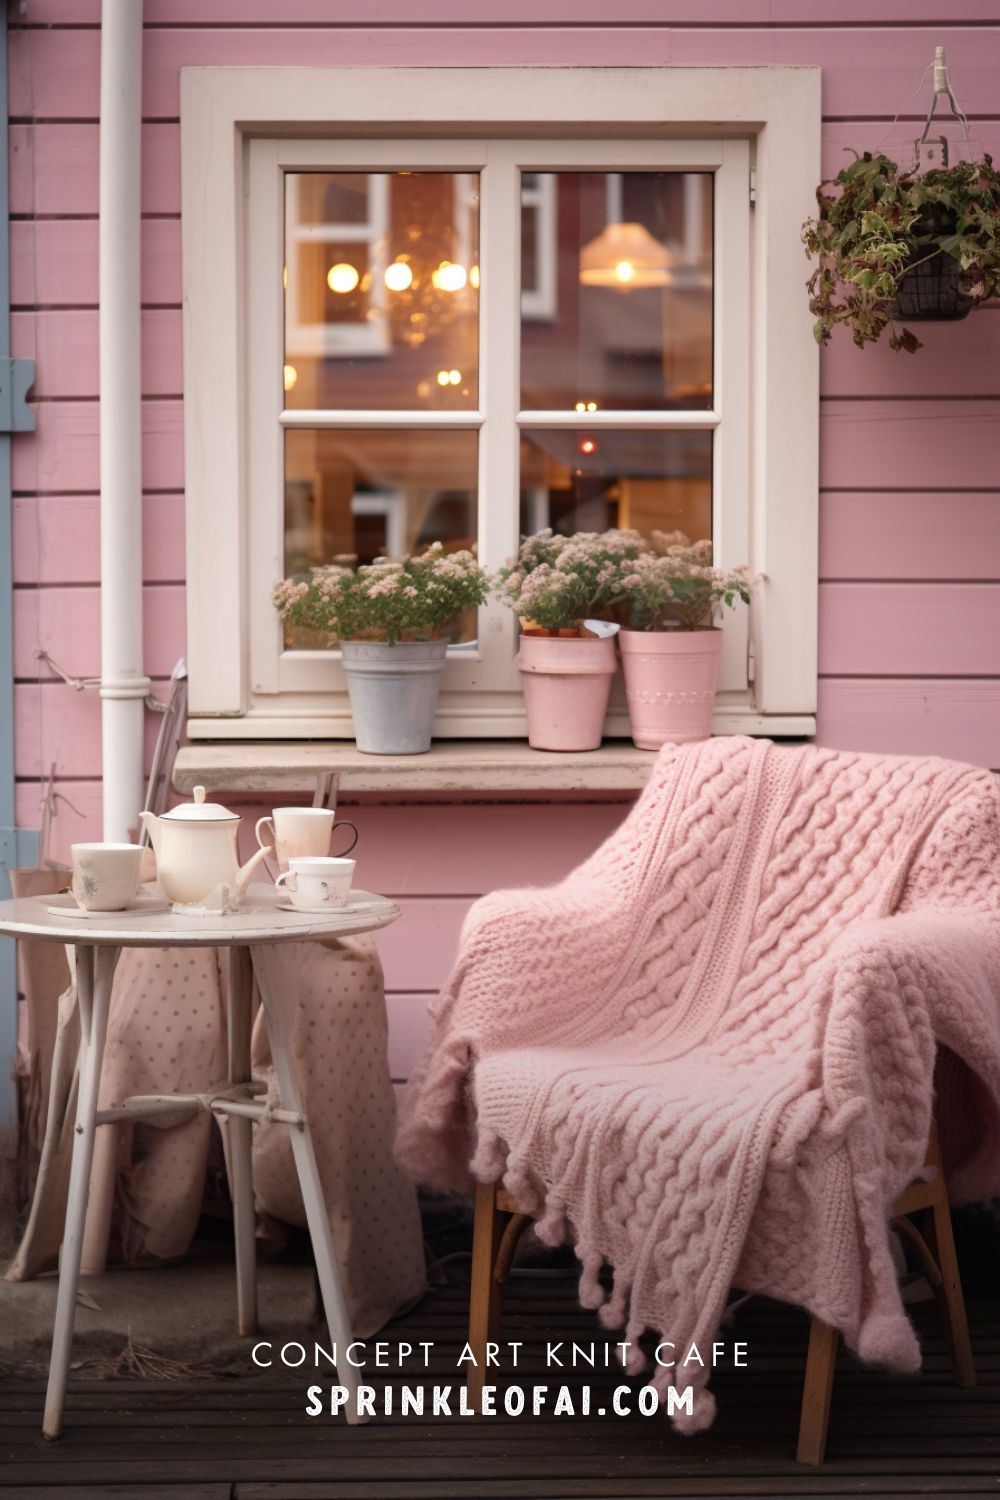 Welcome to Our Knit Cafe - Concept Art made with Midjourney - WILMADE - MACRAMEFORBEGINNERS